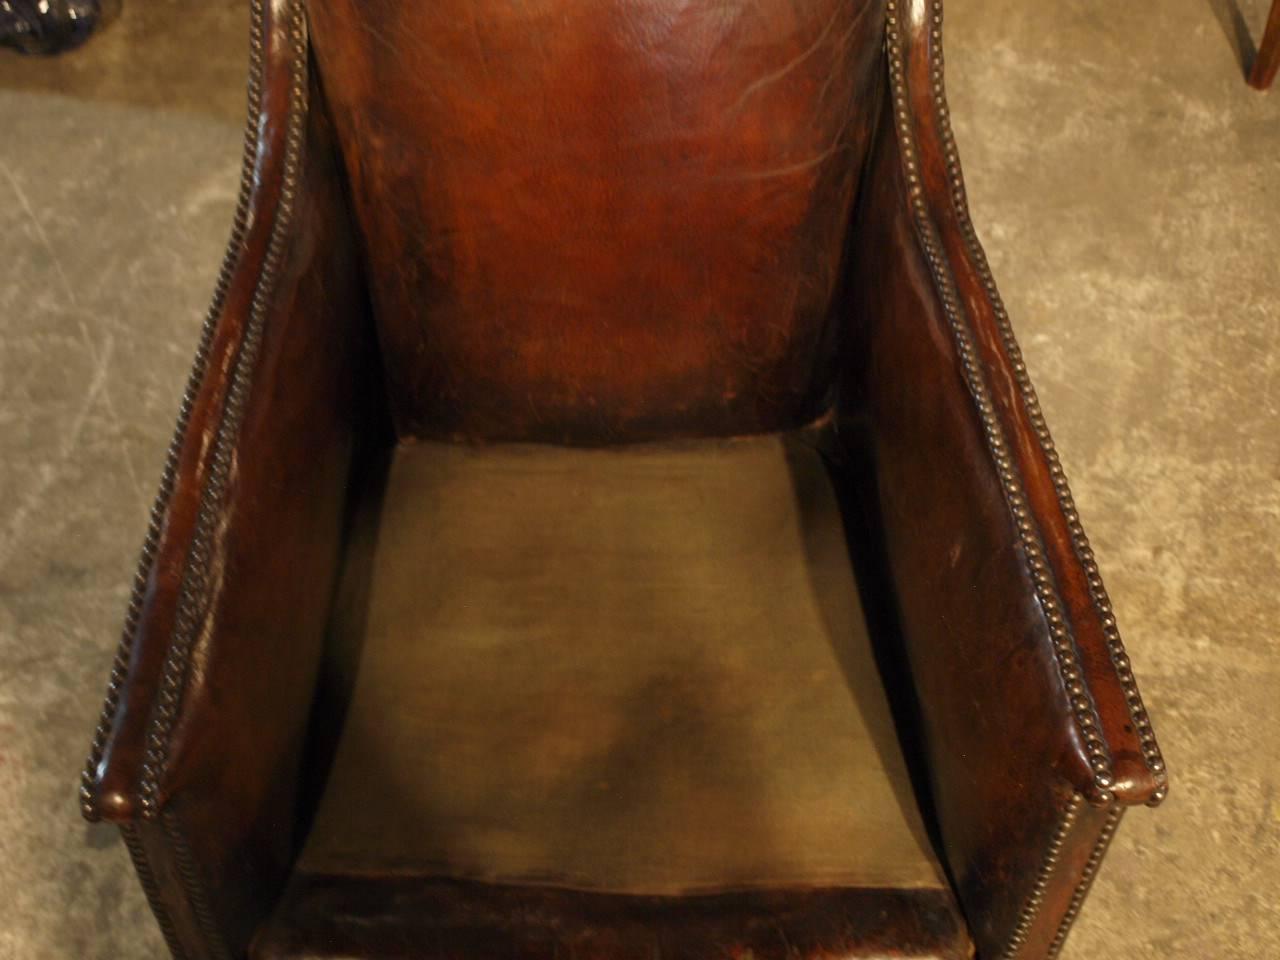 French Art Deco Leather Club Chair 4